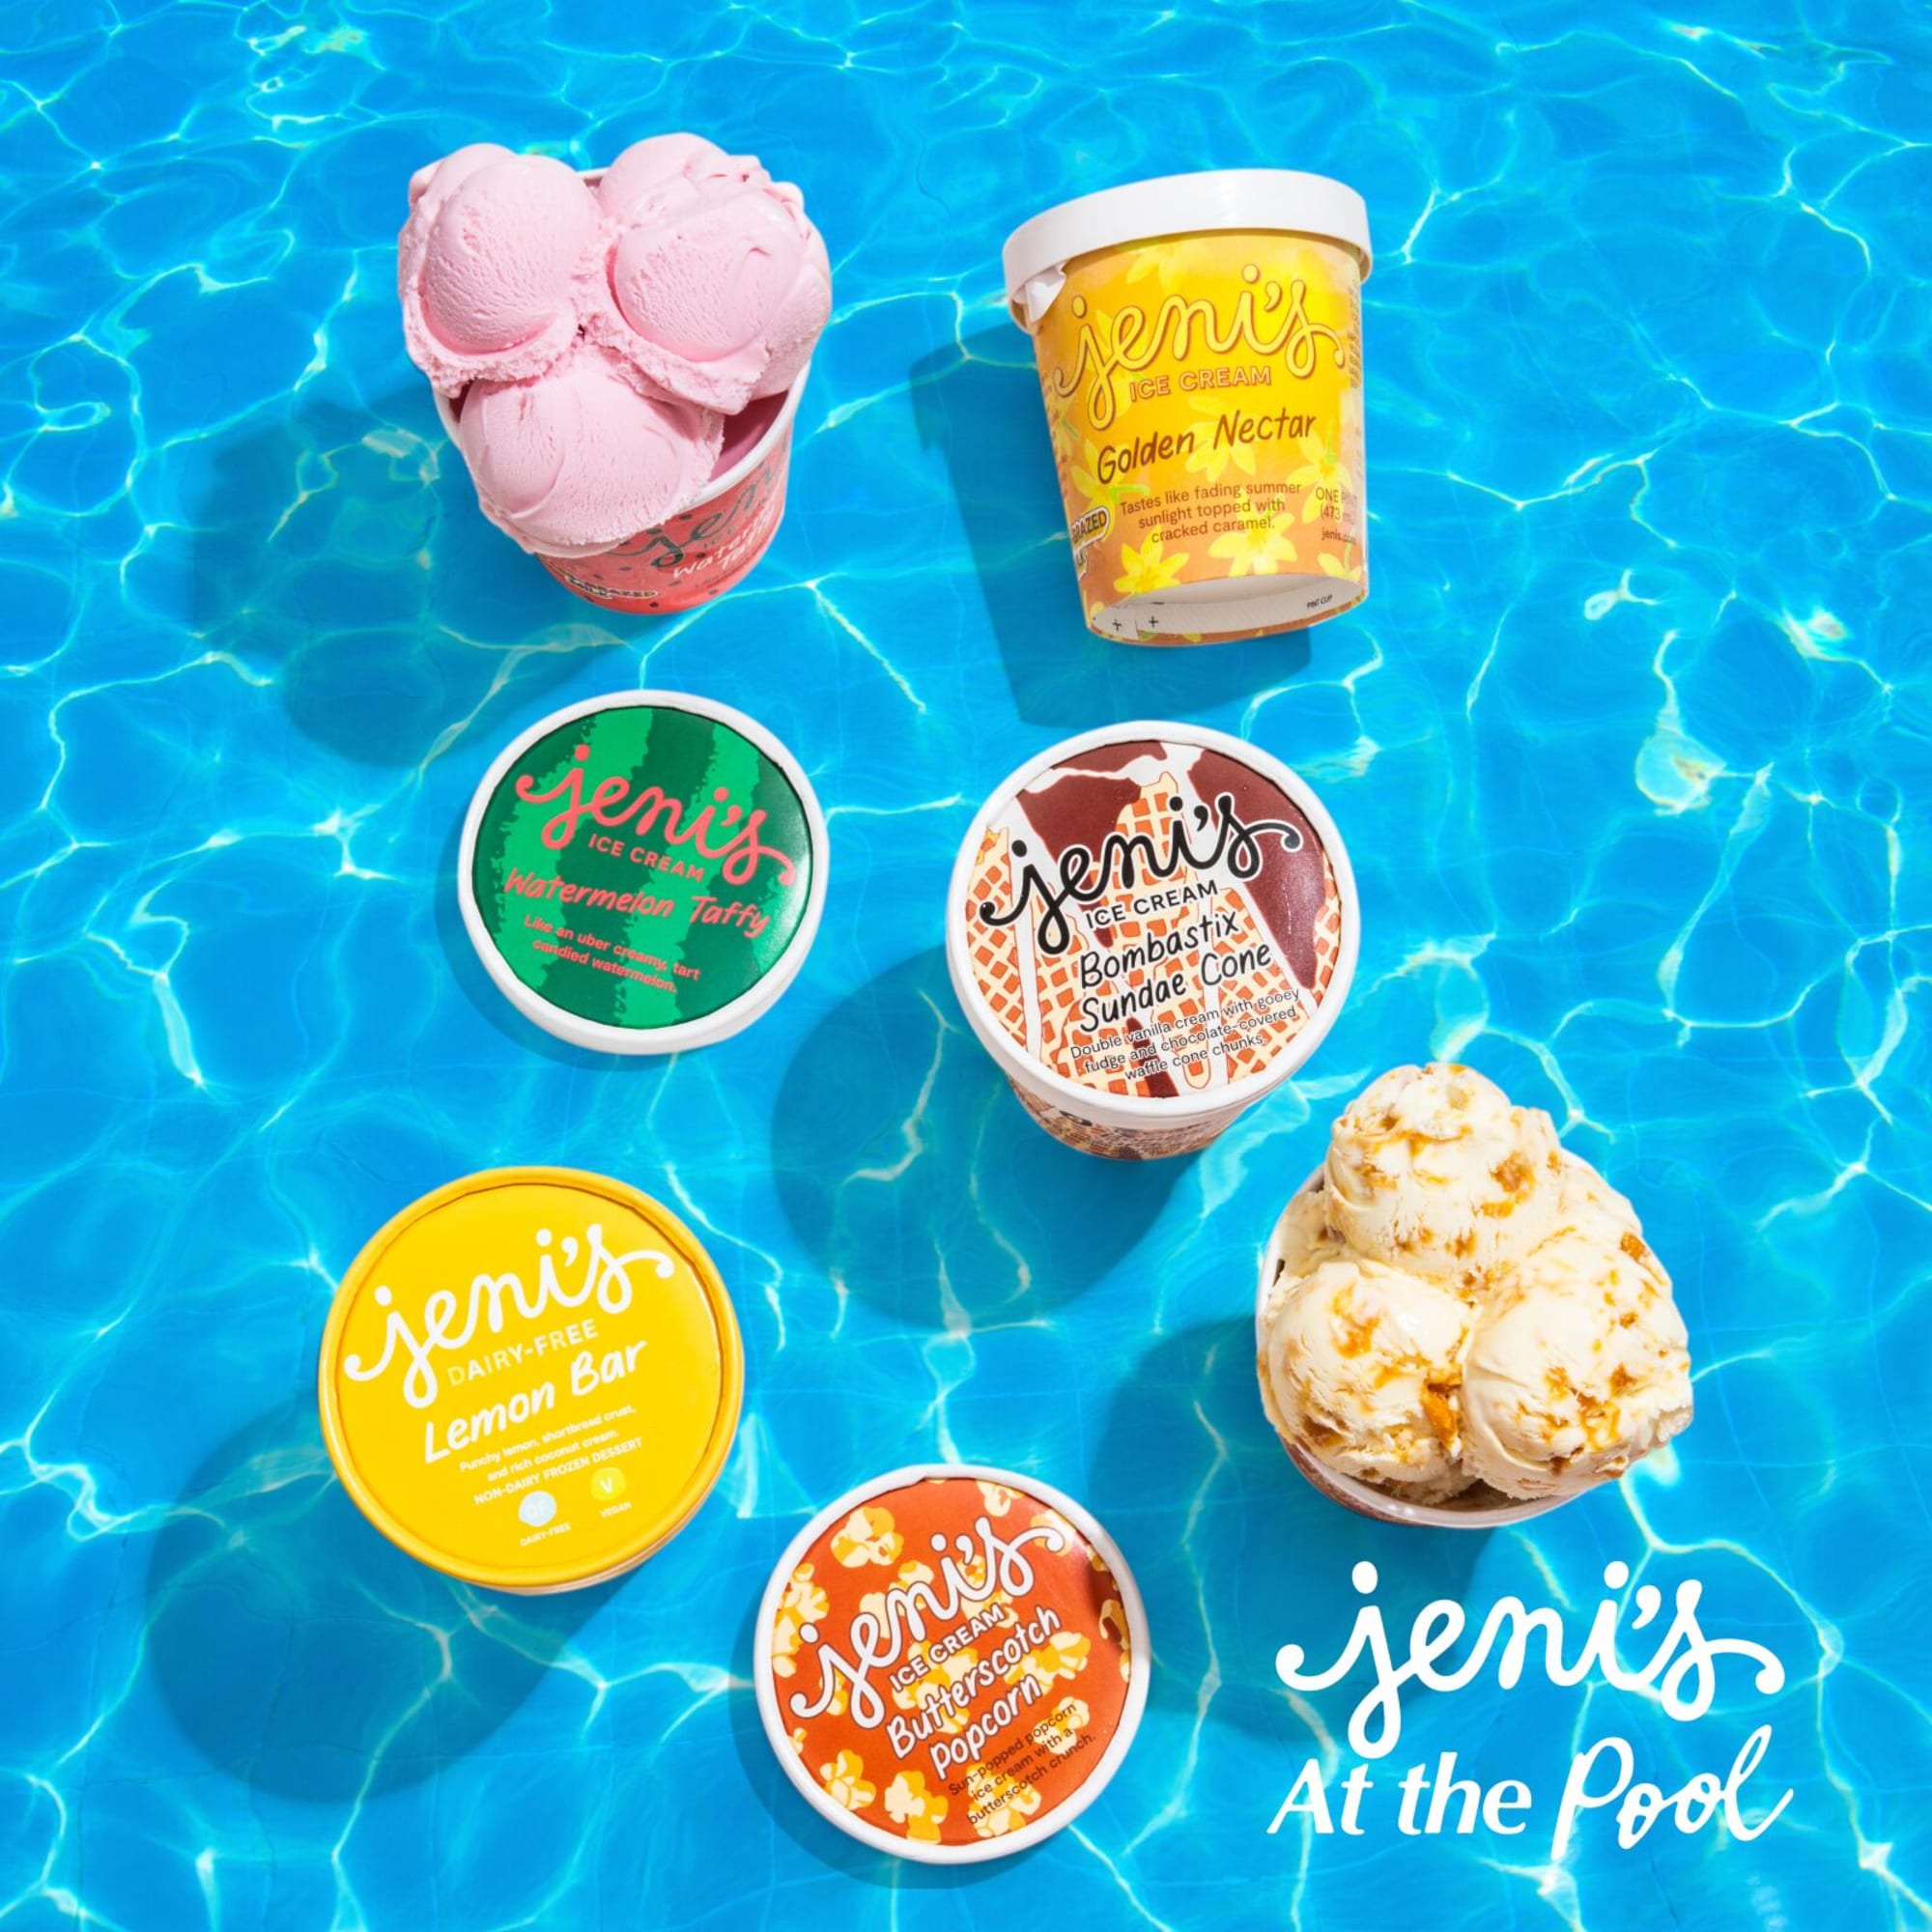 Jeni's Ice Cream releases a new summer ready collection of flavors